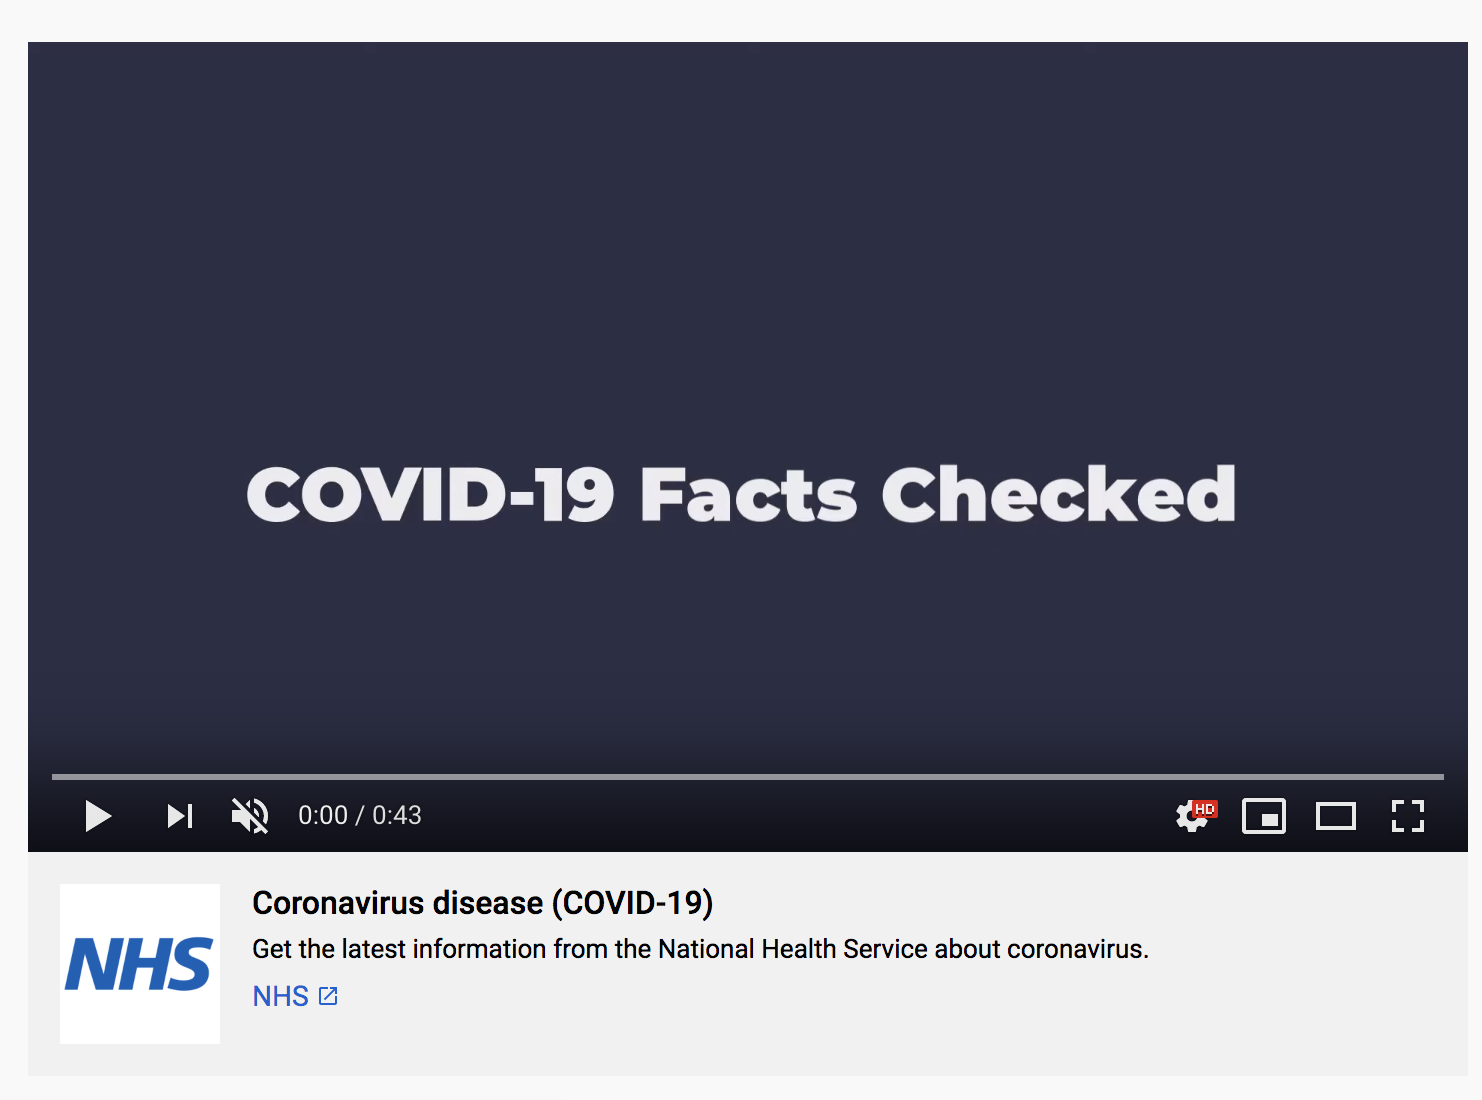 COVID19 FACTS CHECKED